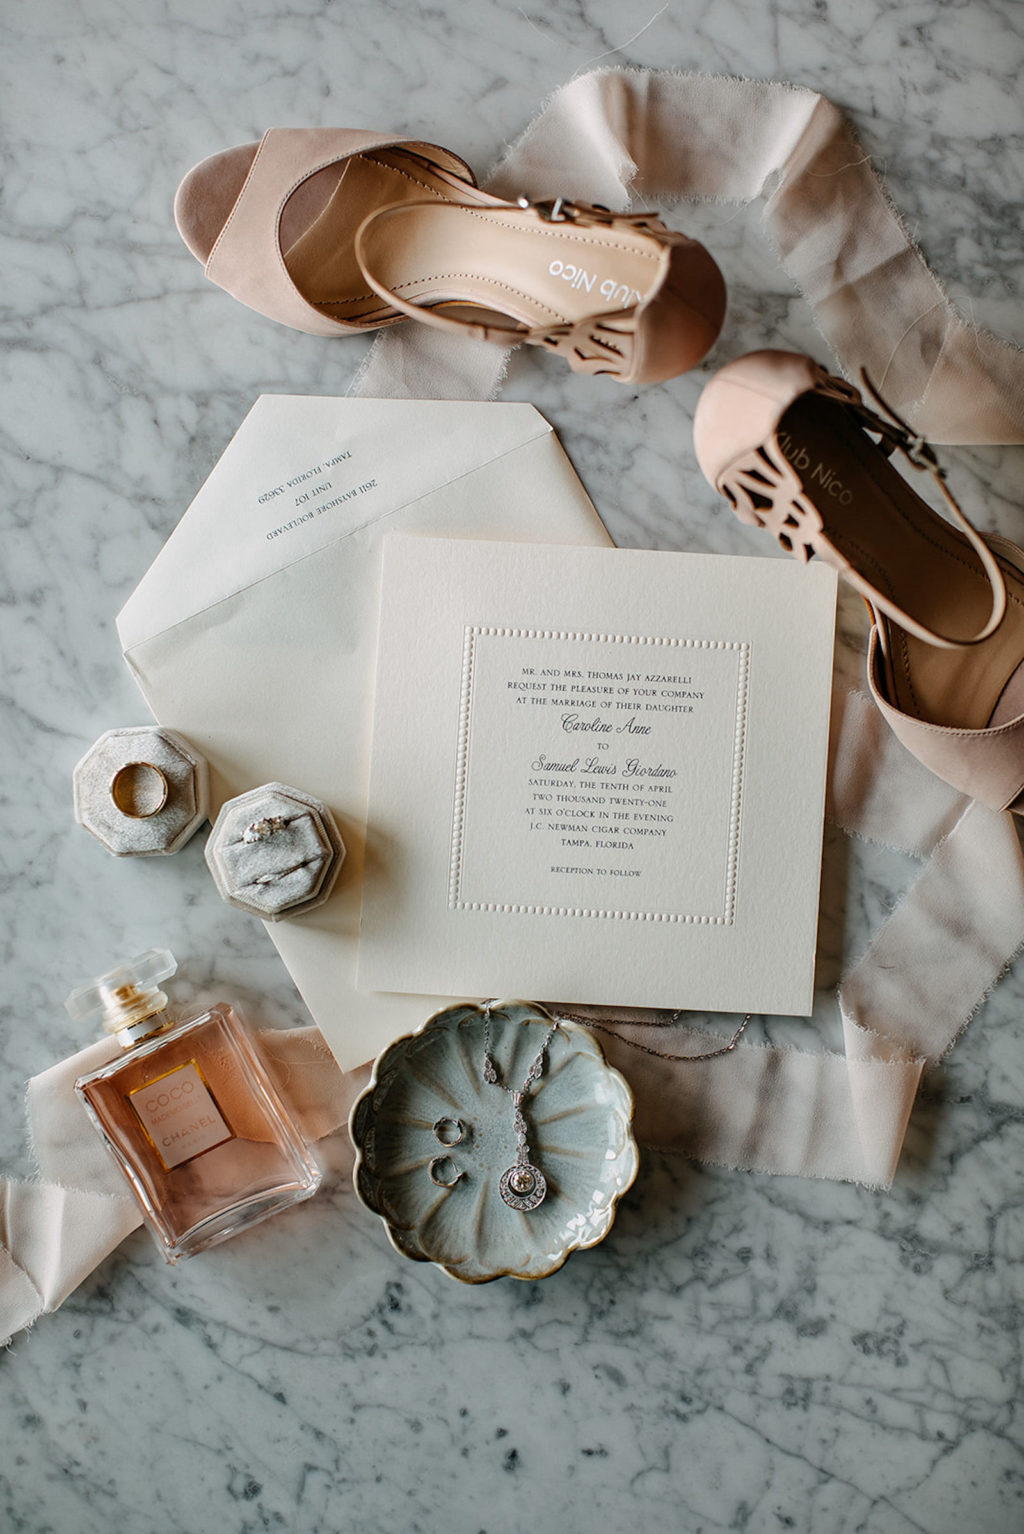 Vintage Inspired Florida Bridal Accessories and Details, Klub Nico Blush Open Toe Shoes, Ivory Square Invitation Suite, Coco Channel Perfume, Hexagon Velvet Ring Bow, Dangle Necklace with Small Hoop Earrings